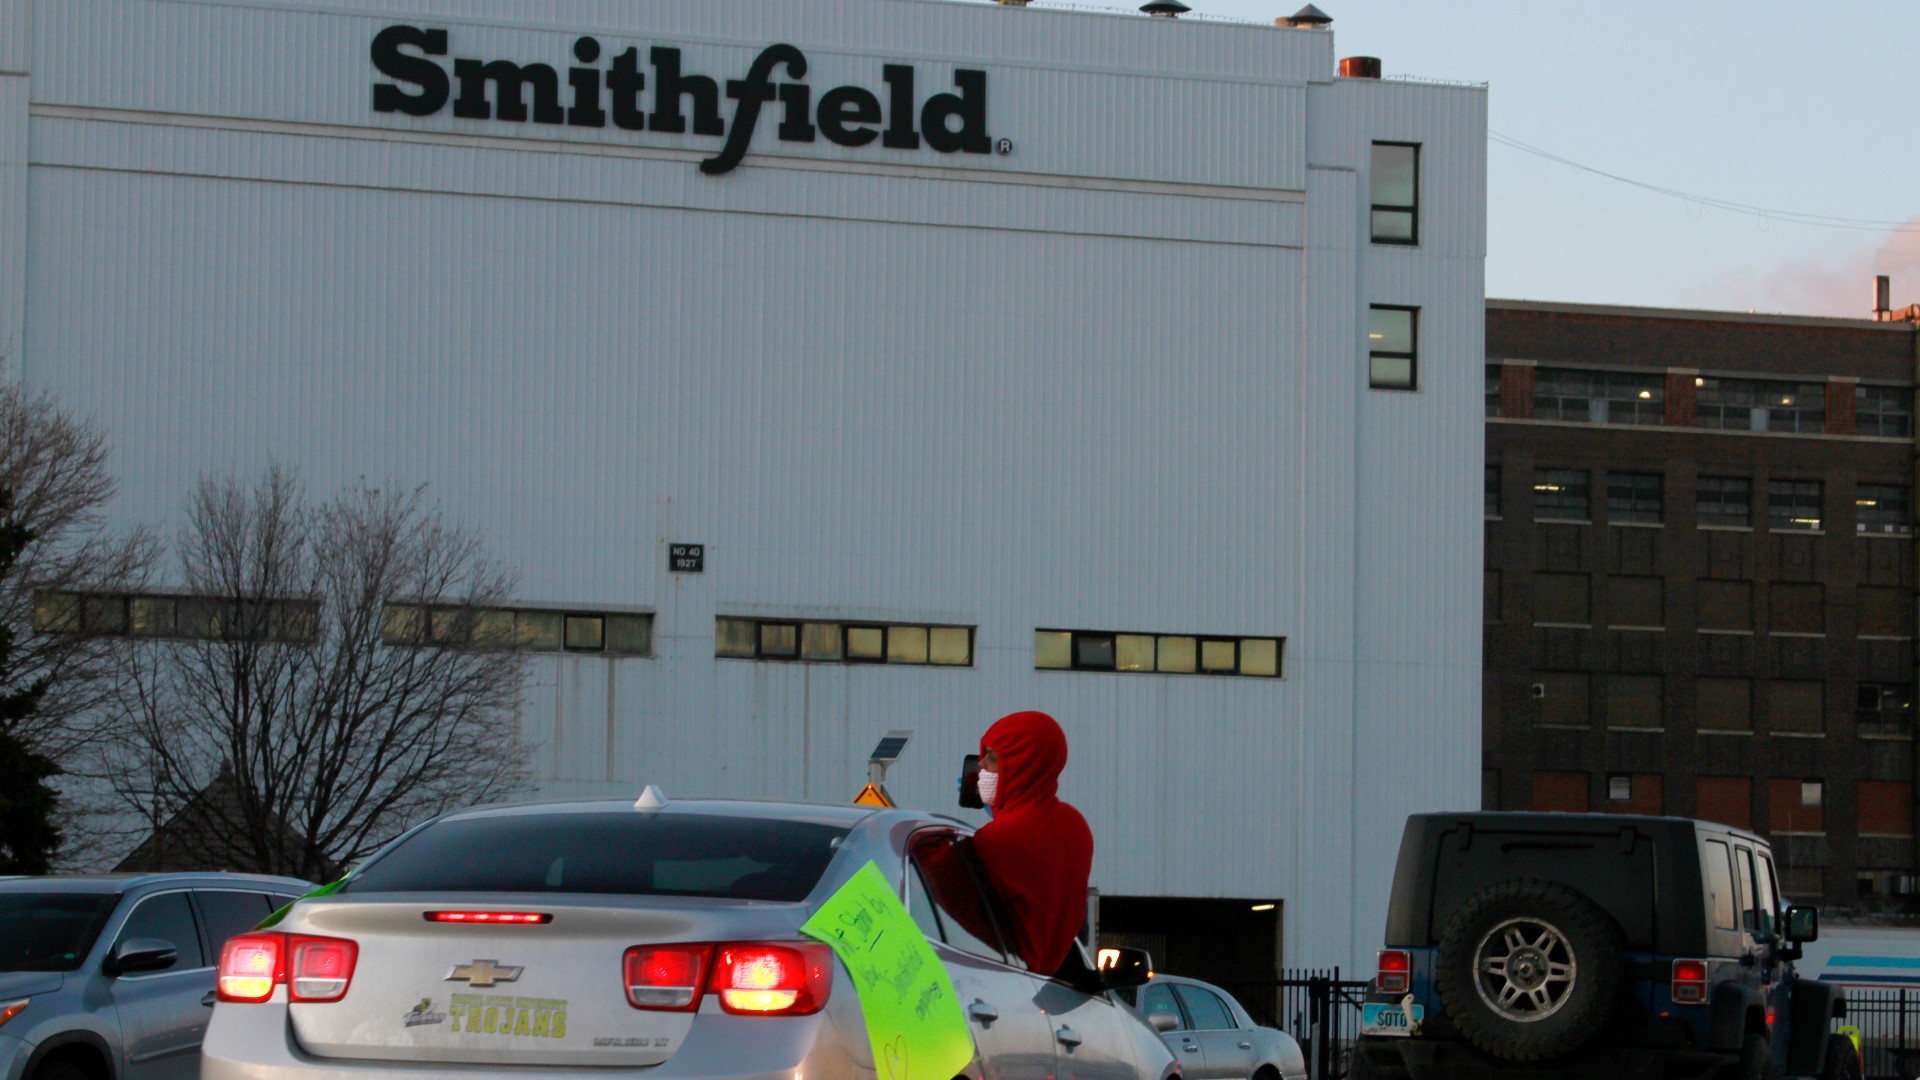 "My thoughts go out to the 300 workers who will be losing their jobs when Smithfield closes its operations in Altoona," said Iowa Sen. Nate Boulton.